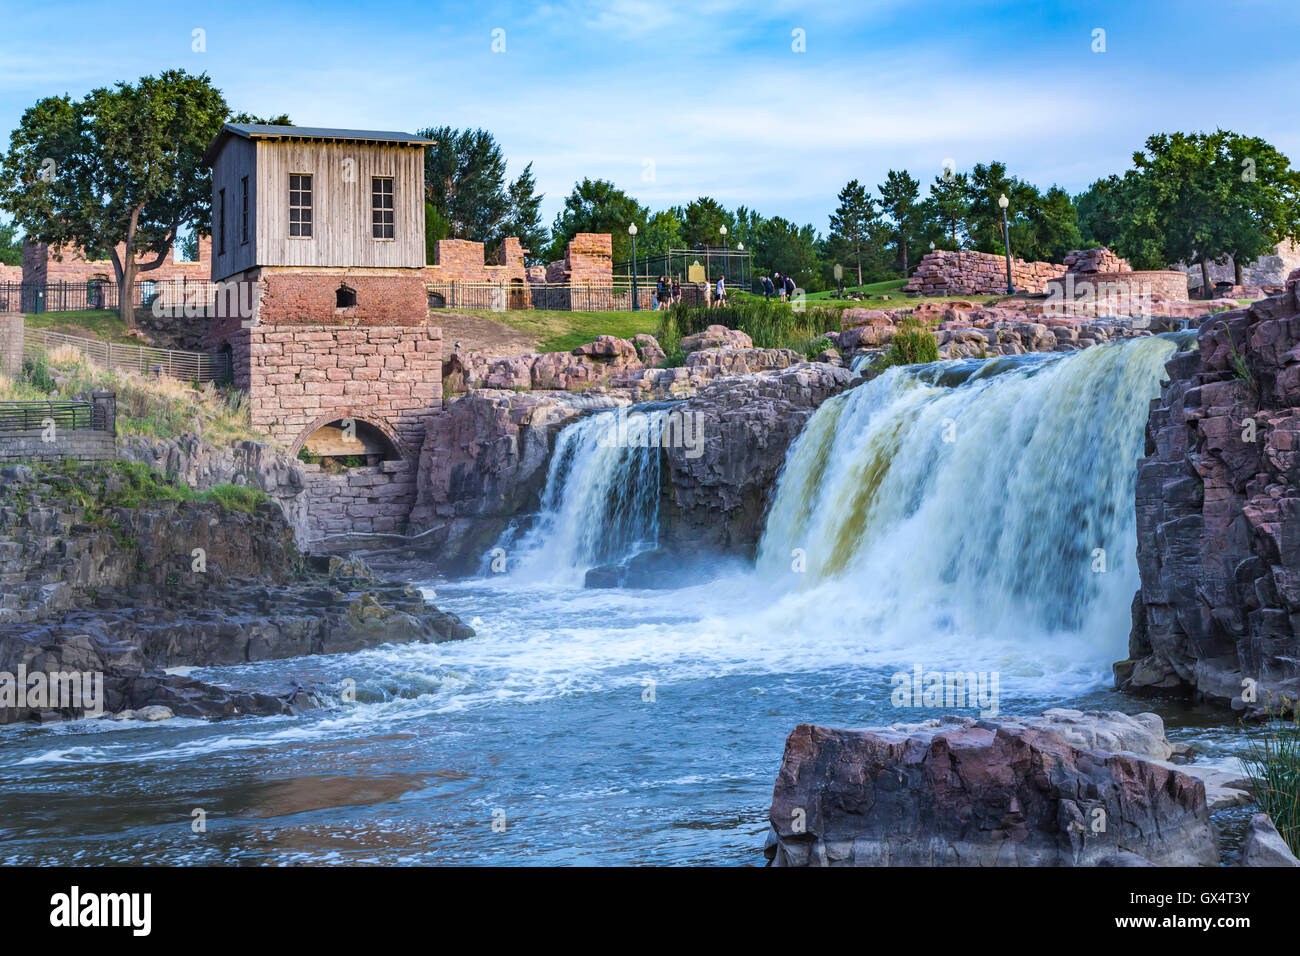 The falls of the Big Sioux River in Falls Park, Sioux City, South Dakota, USA. Stock Photo